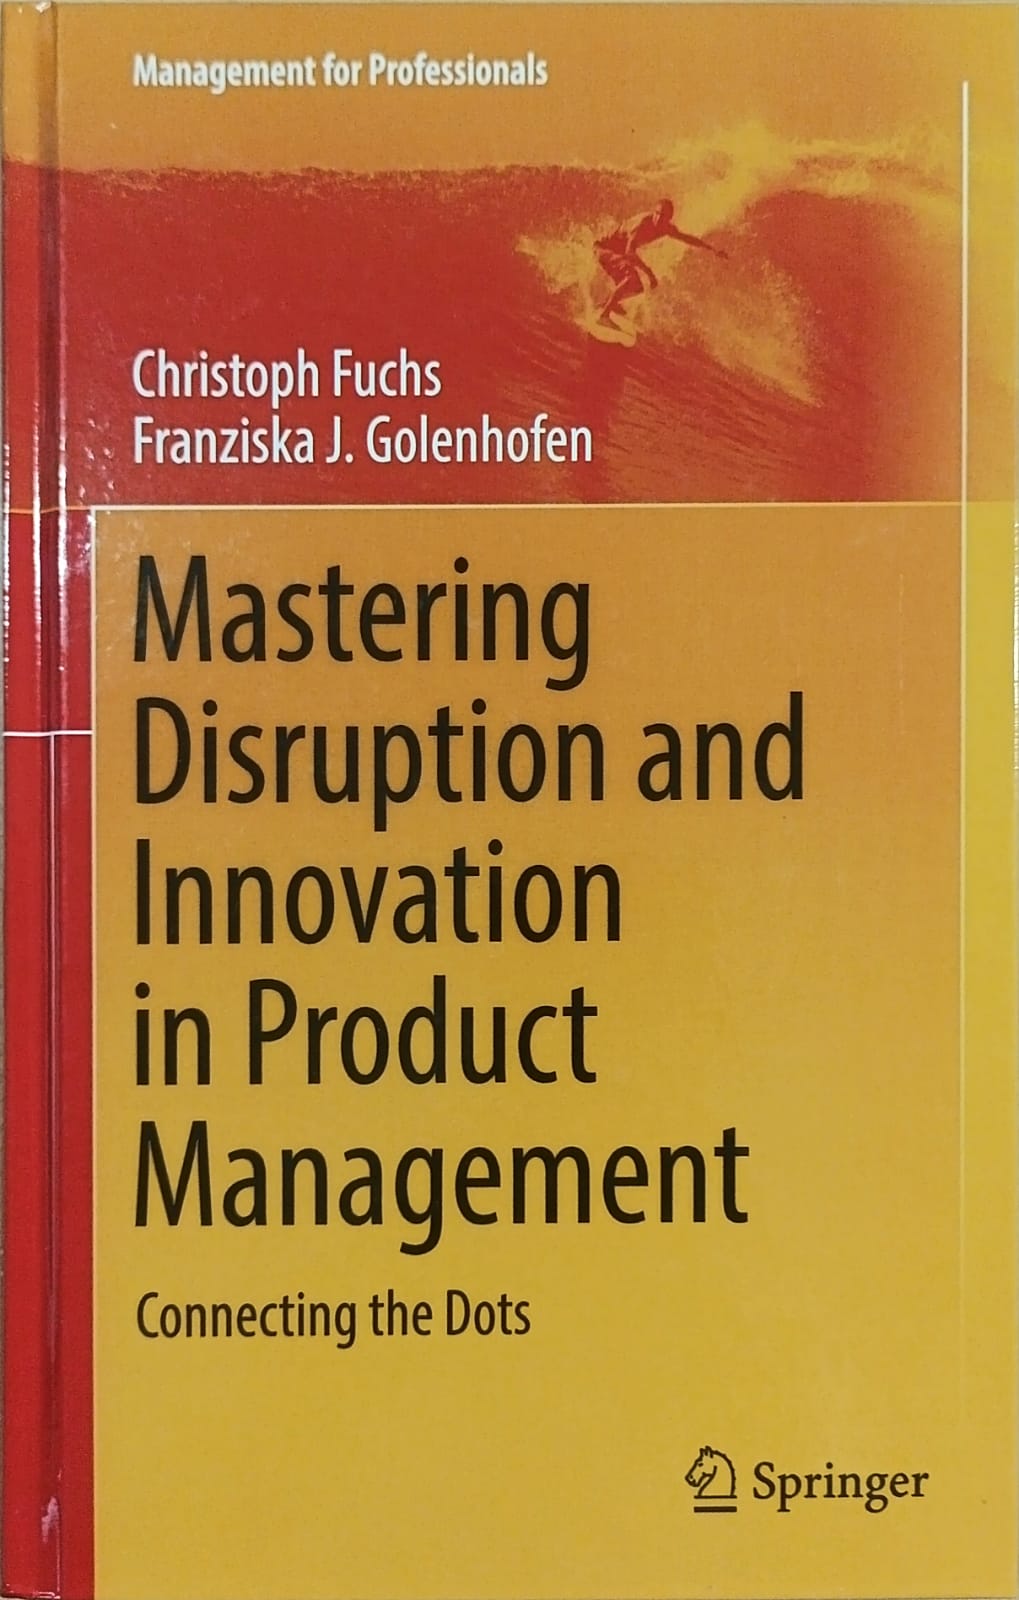 Mastering disruption and innovation in product management: connecting the dots